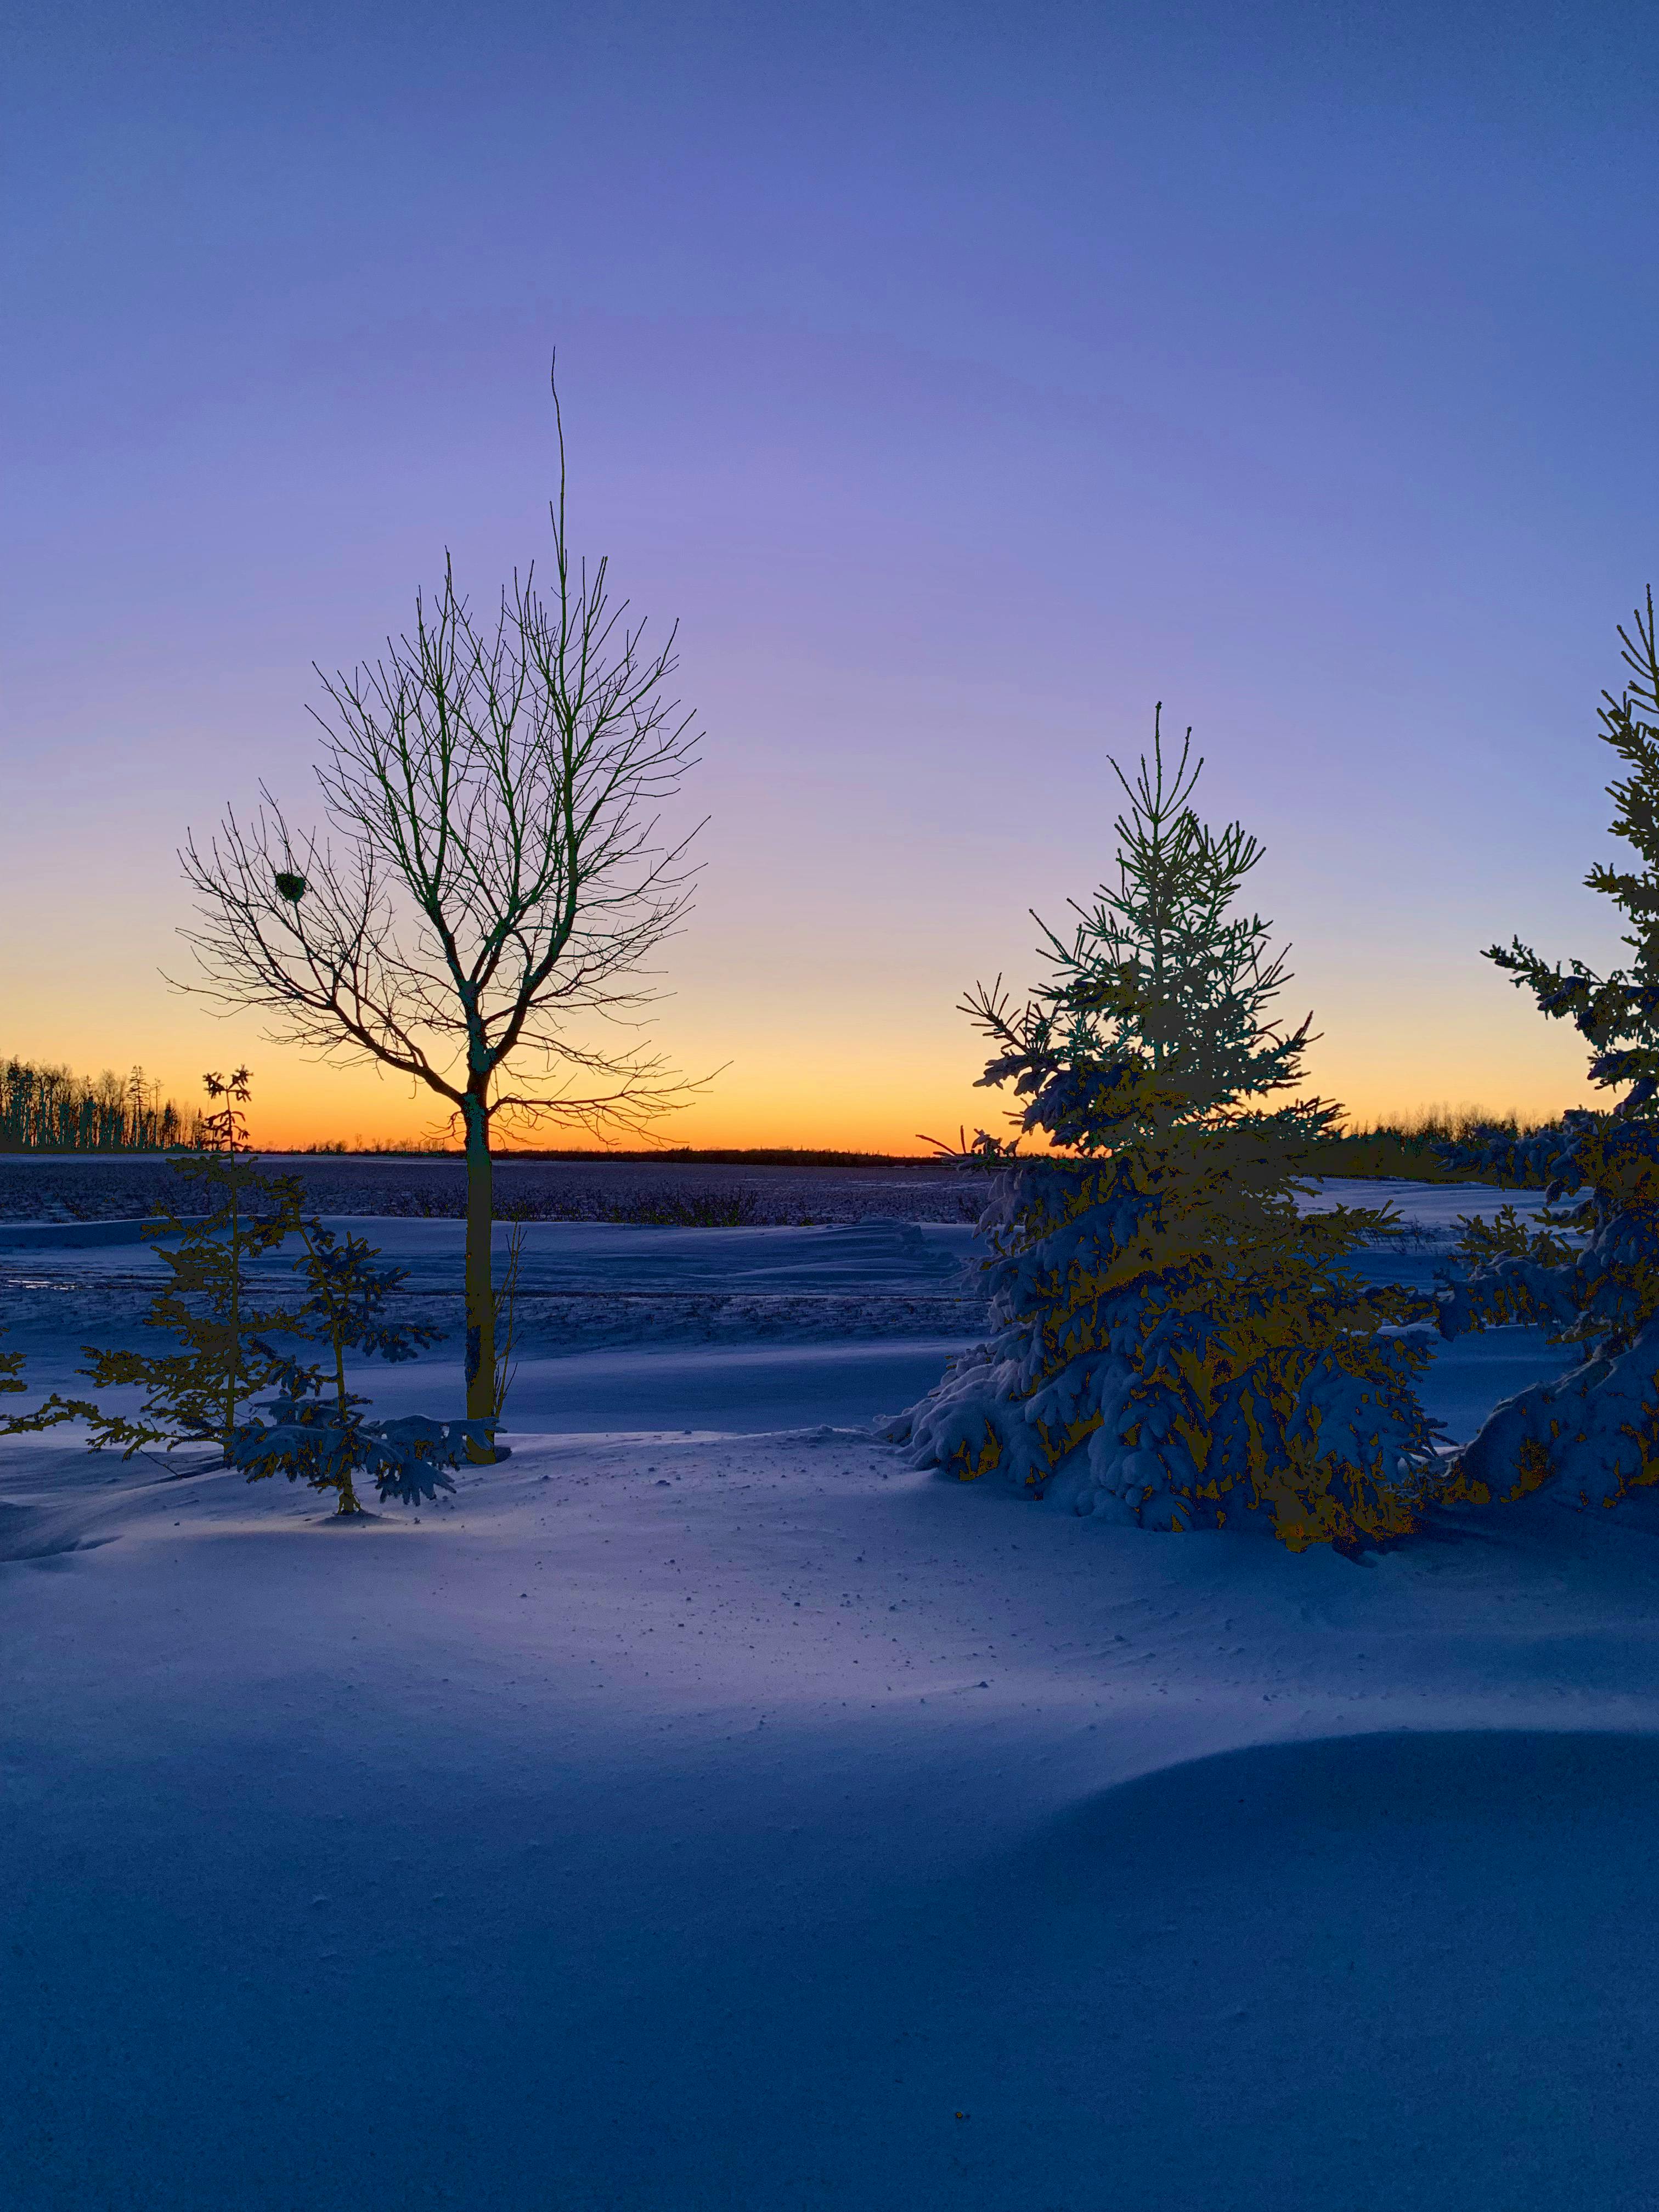 Love it or hate it, winter can create some specular scenes here in Atlantic Canada. This photo was taken by Spencer Deagle in Mount Royal, P.E.I., after the first snowstorm of 2022. The golden hour hues of the low horizon sun accent the freshly fallen snow on the trees and ground. I hope this photo adds some warmth to your Tuesday. Thank you for the photo, Spencer. 

Send me your storm photos for a chance to be featured: weather@saltwire.com.